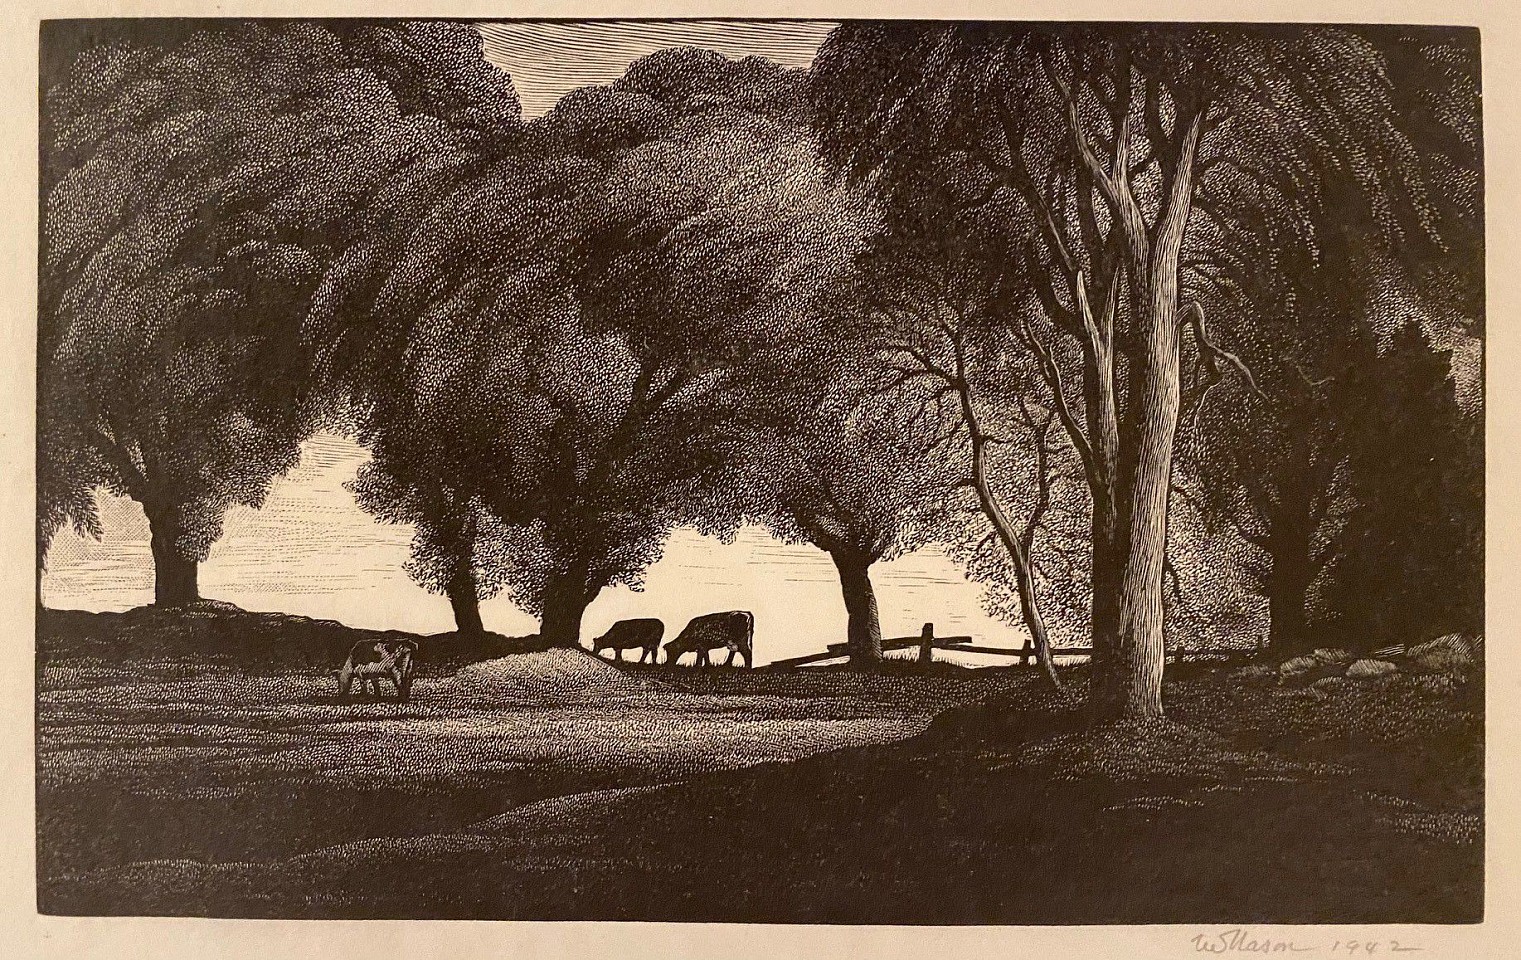 Thomas Willoughby Nason, Under the Trees, 1942
wood engraving on paper, 5 1/2"" x 8 1/4""
JCA 6325
$1,100